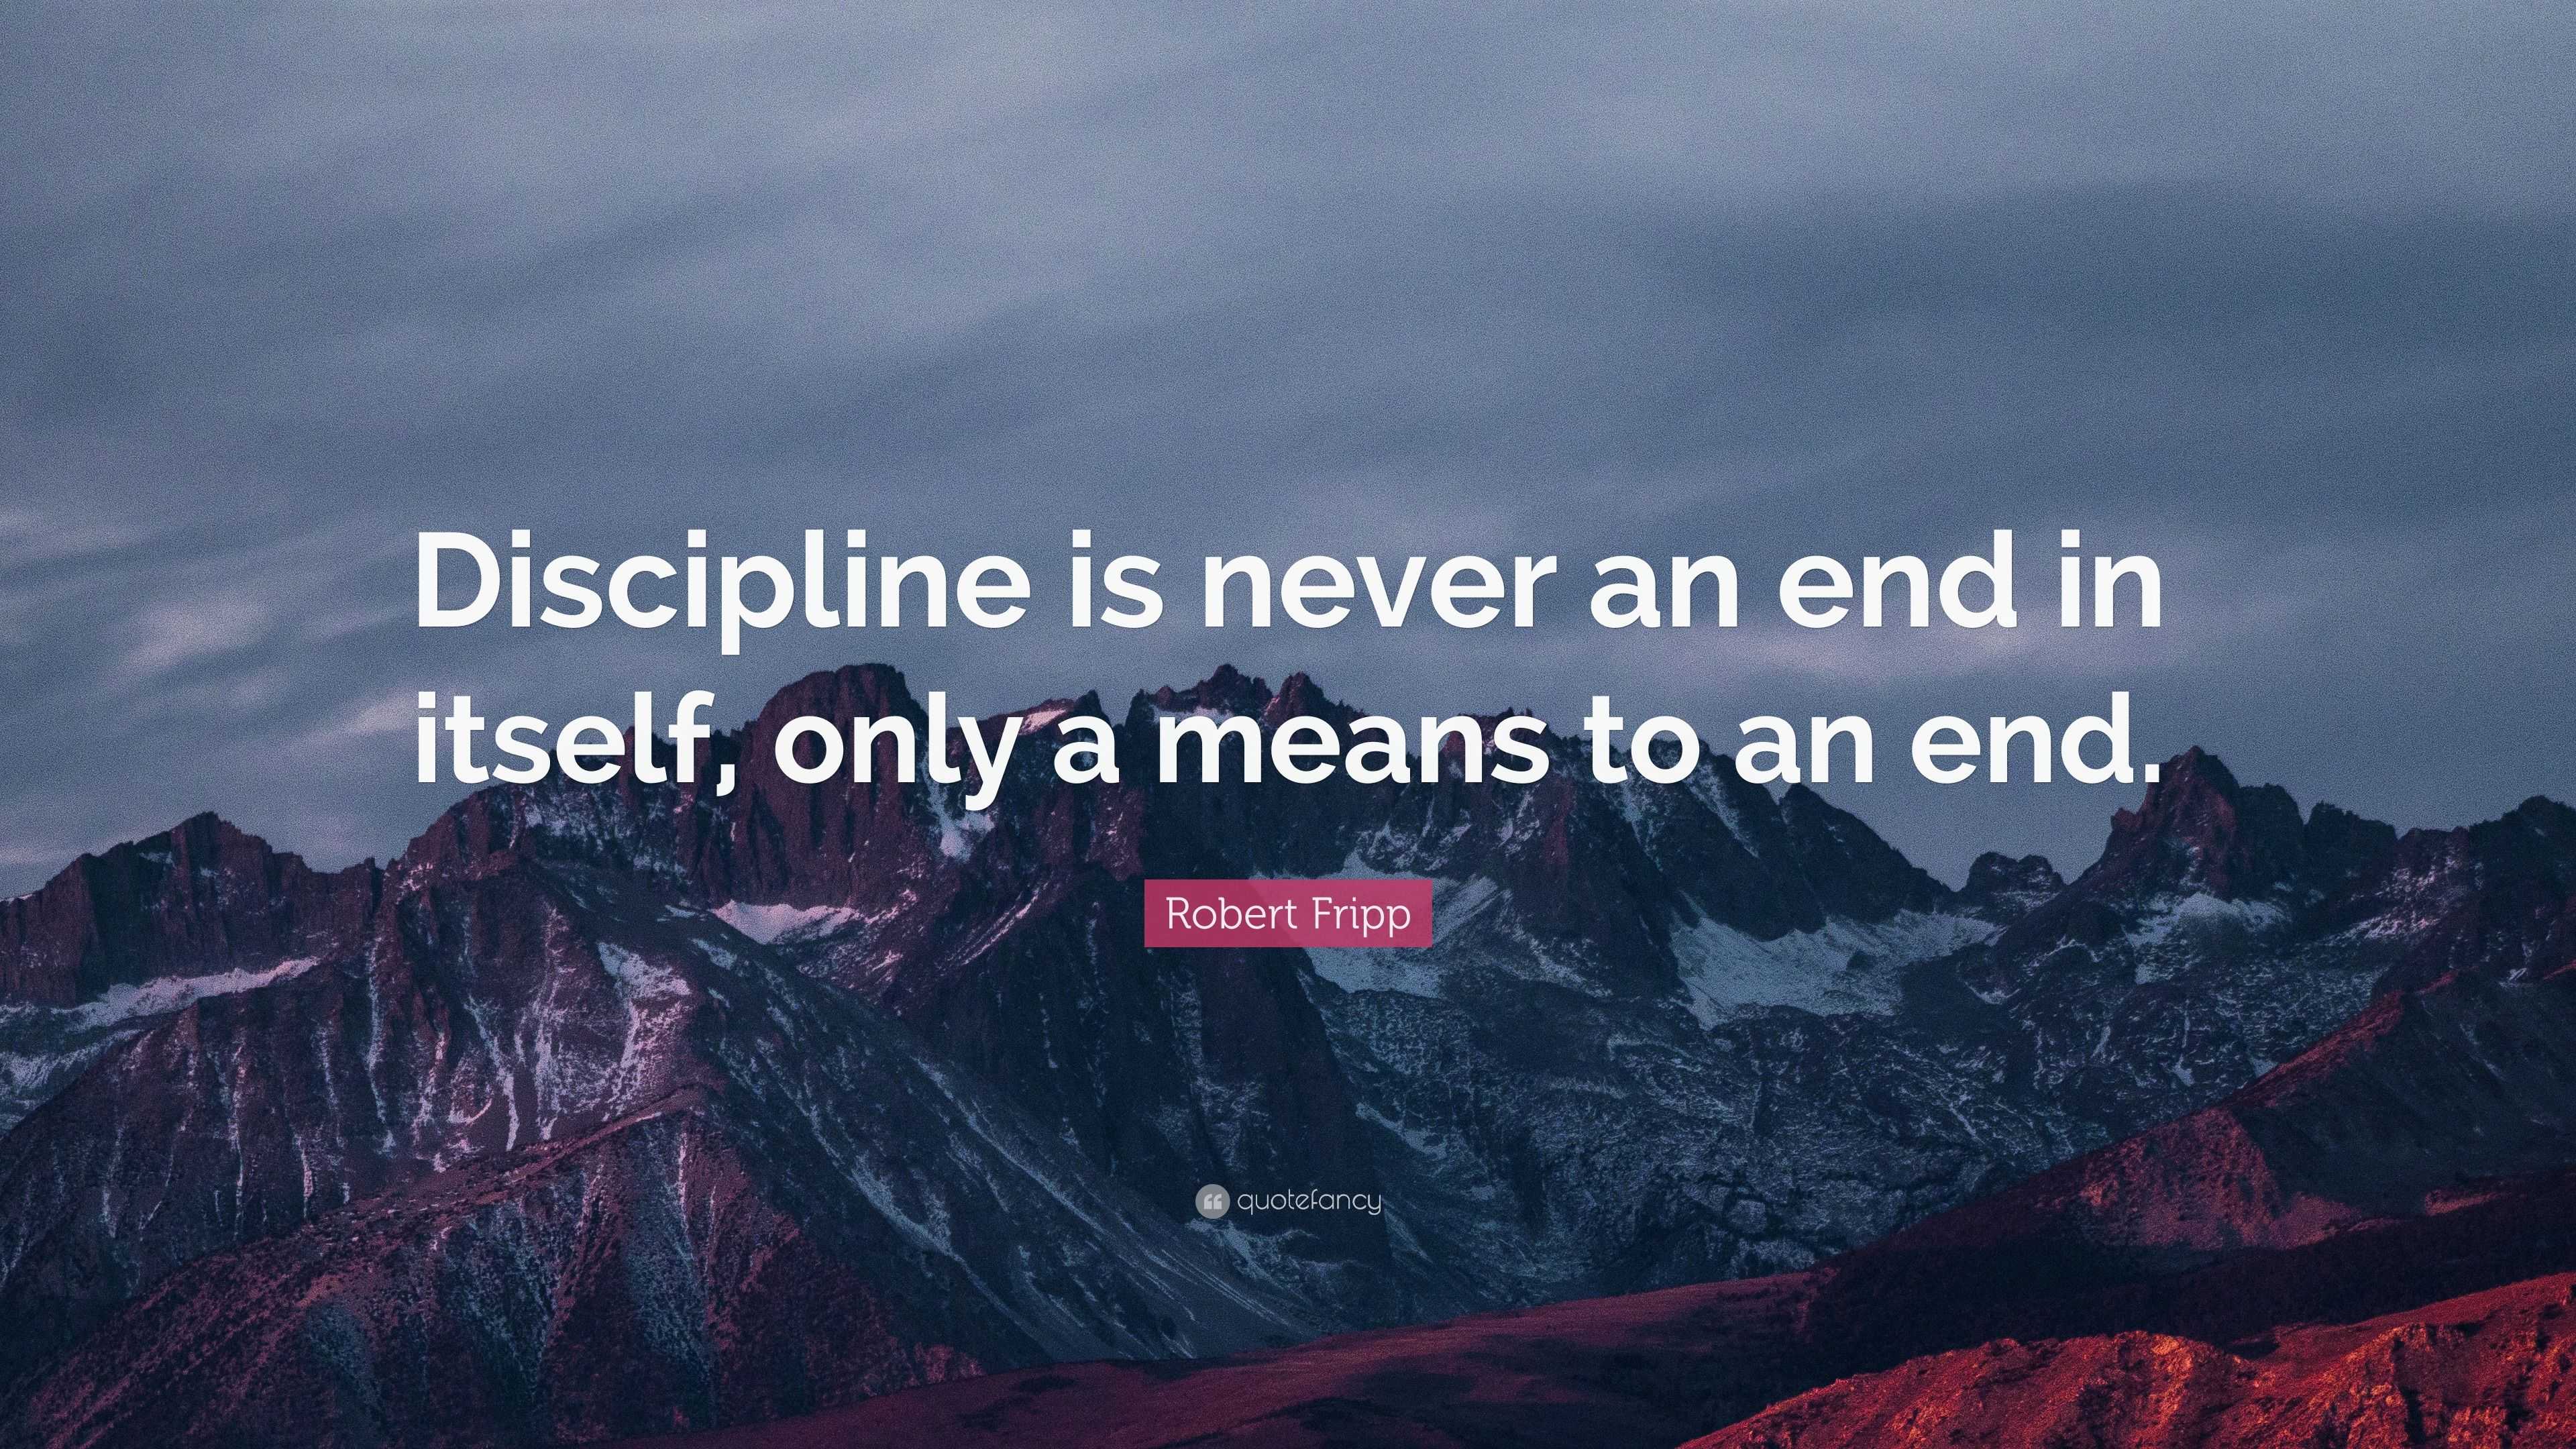 Robert Fripp Quote: “Discipline is never an end in itself, only a means ...